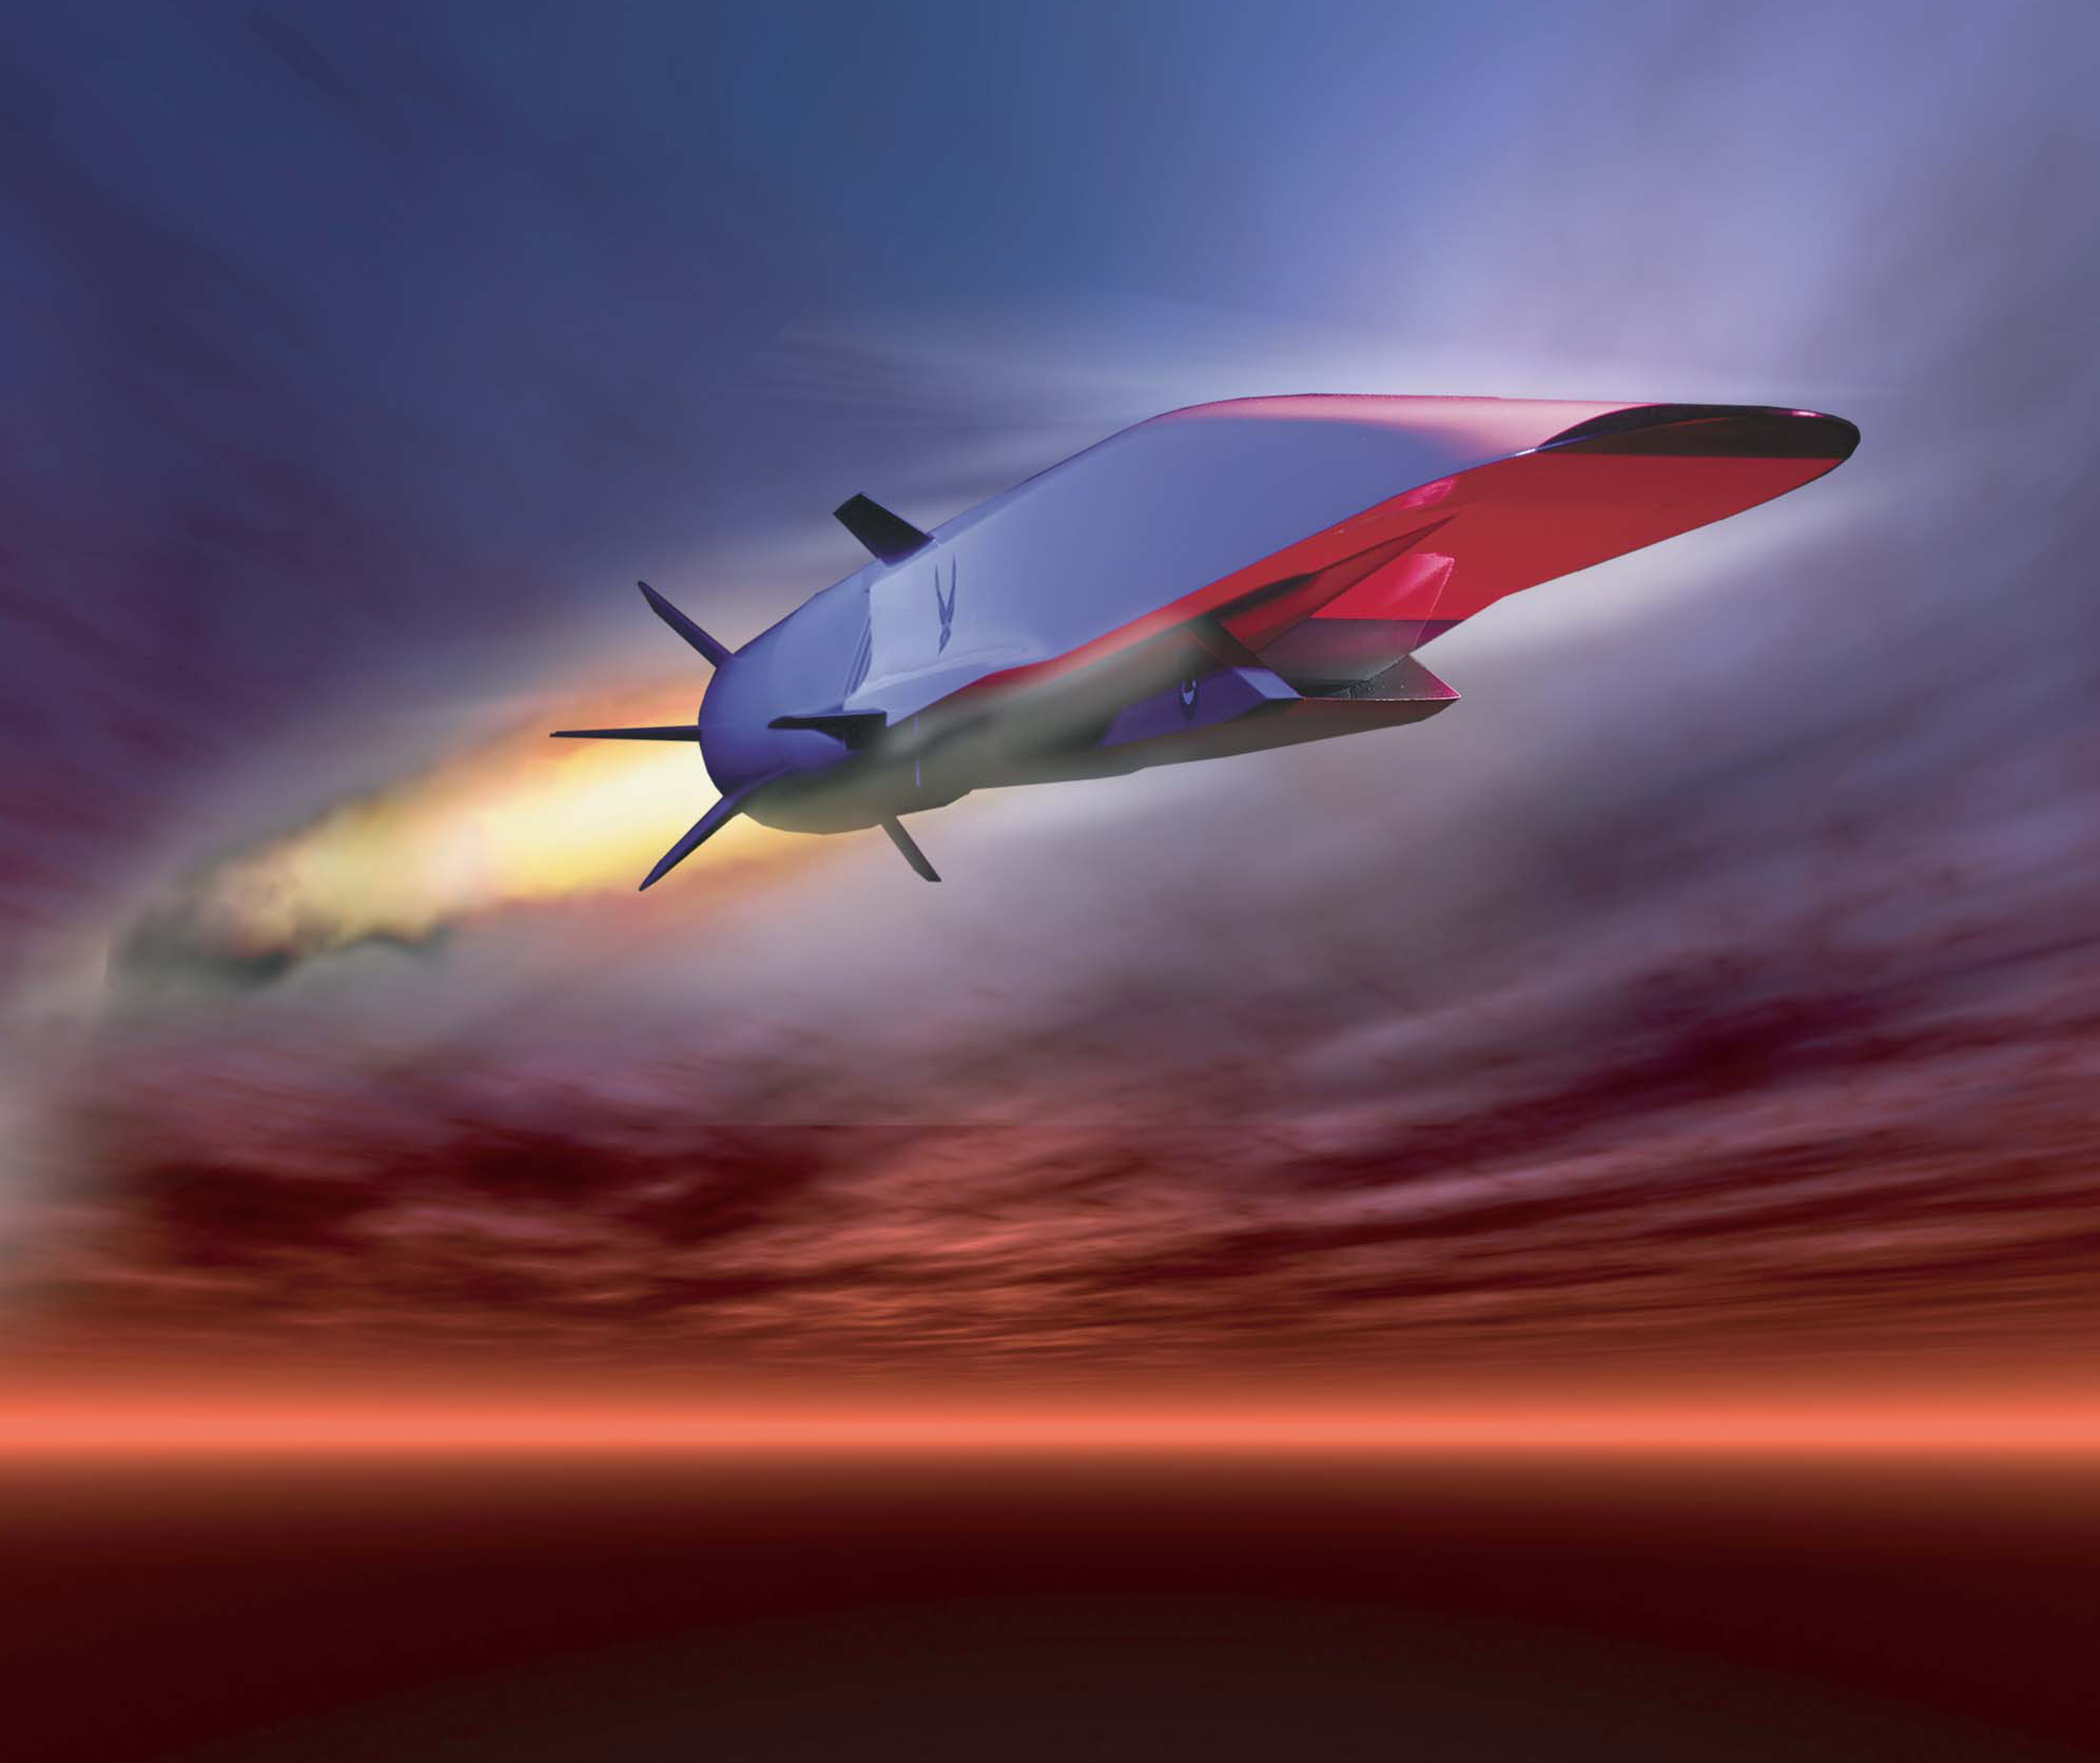 Hypersonic missiles can change course to avoid detection and anti-missile defenses.